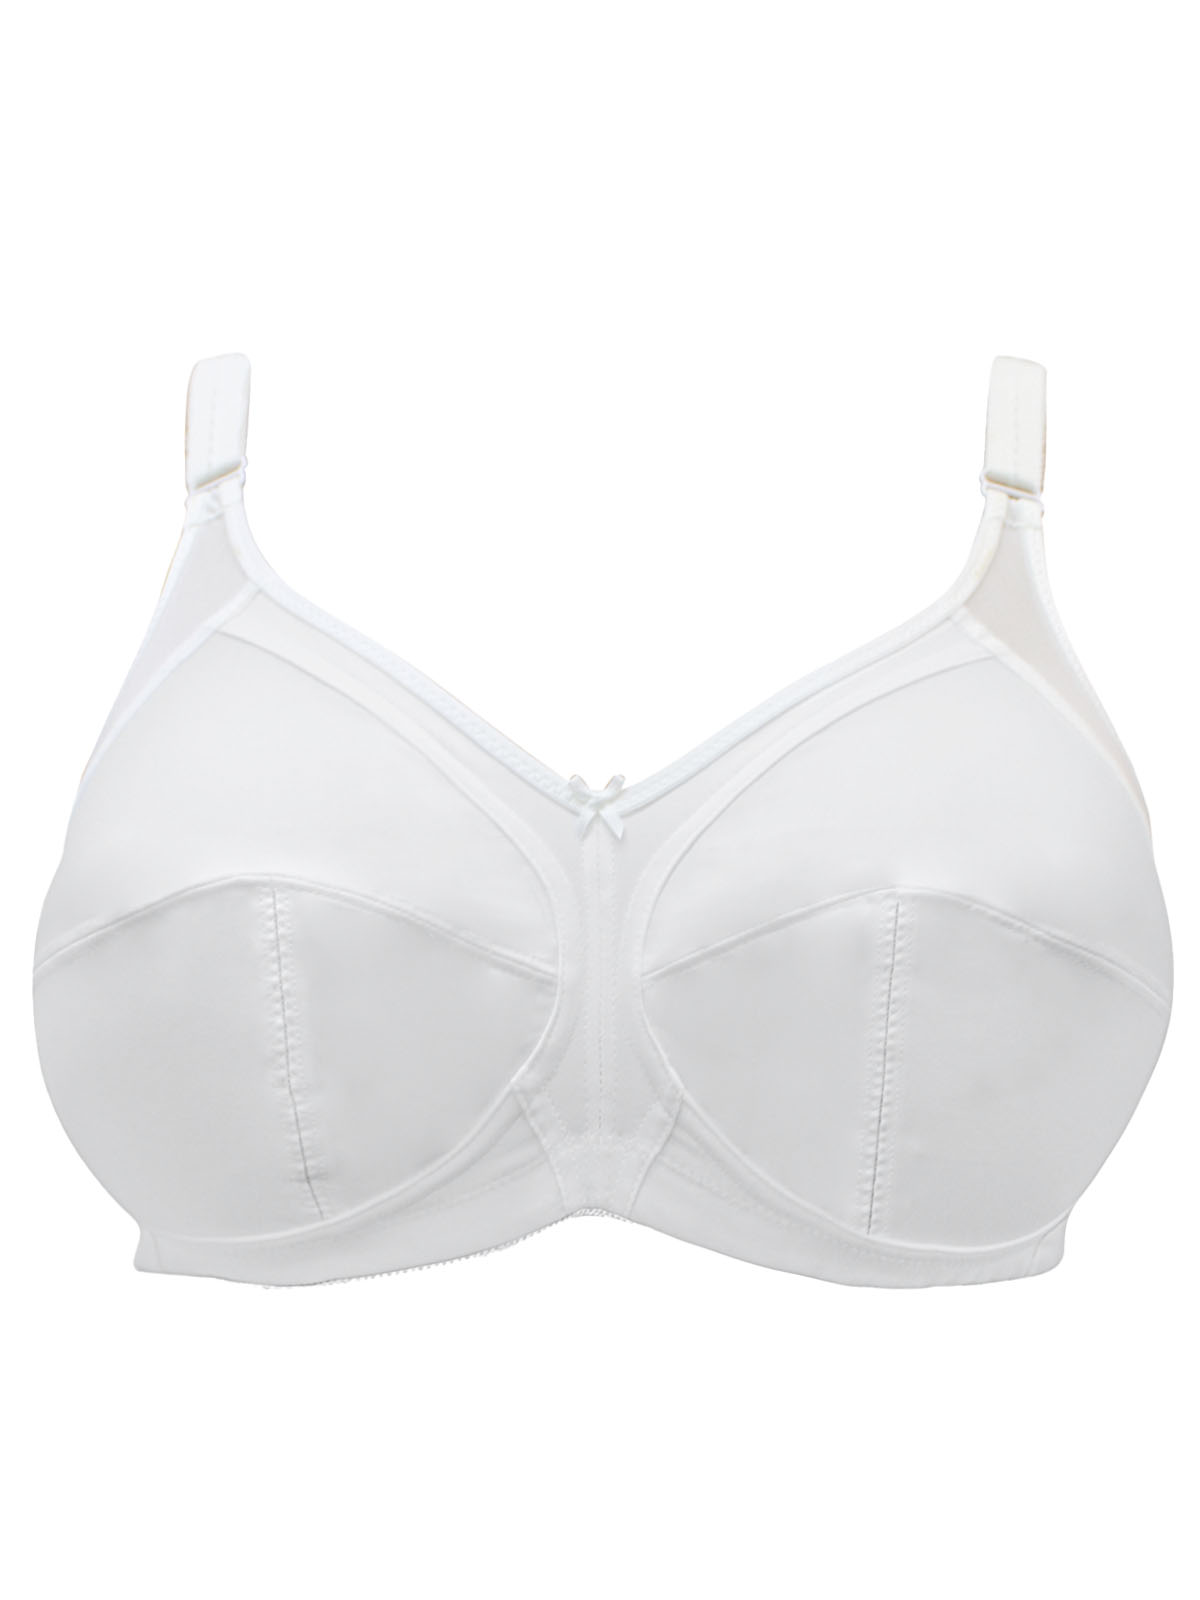 ex M&S TOTAL SUPPORT NON WIRED FULL CUP Bra With STRIPES IN WHITE Size 34GG